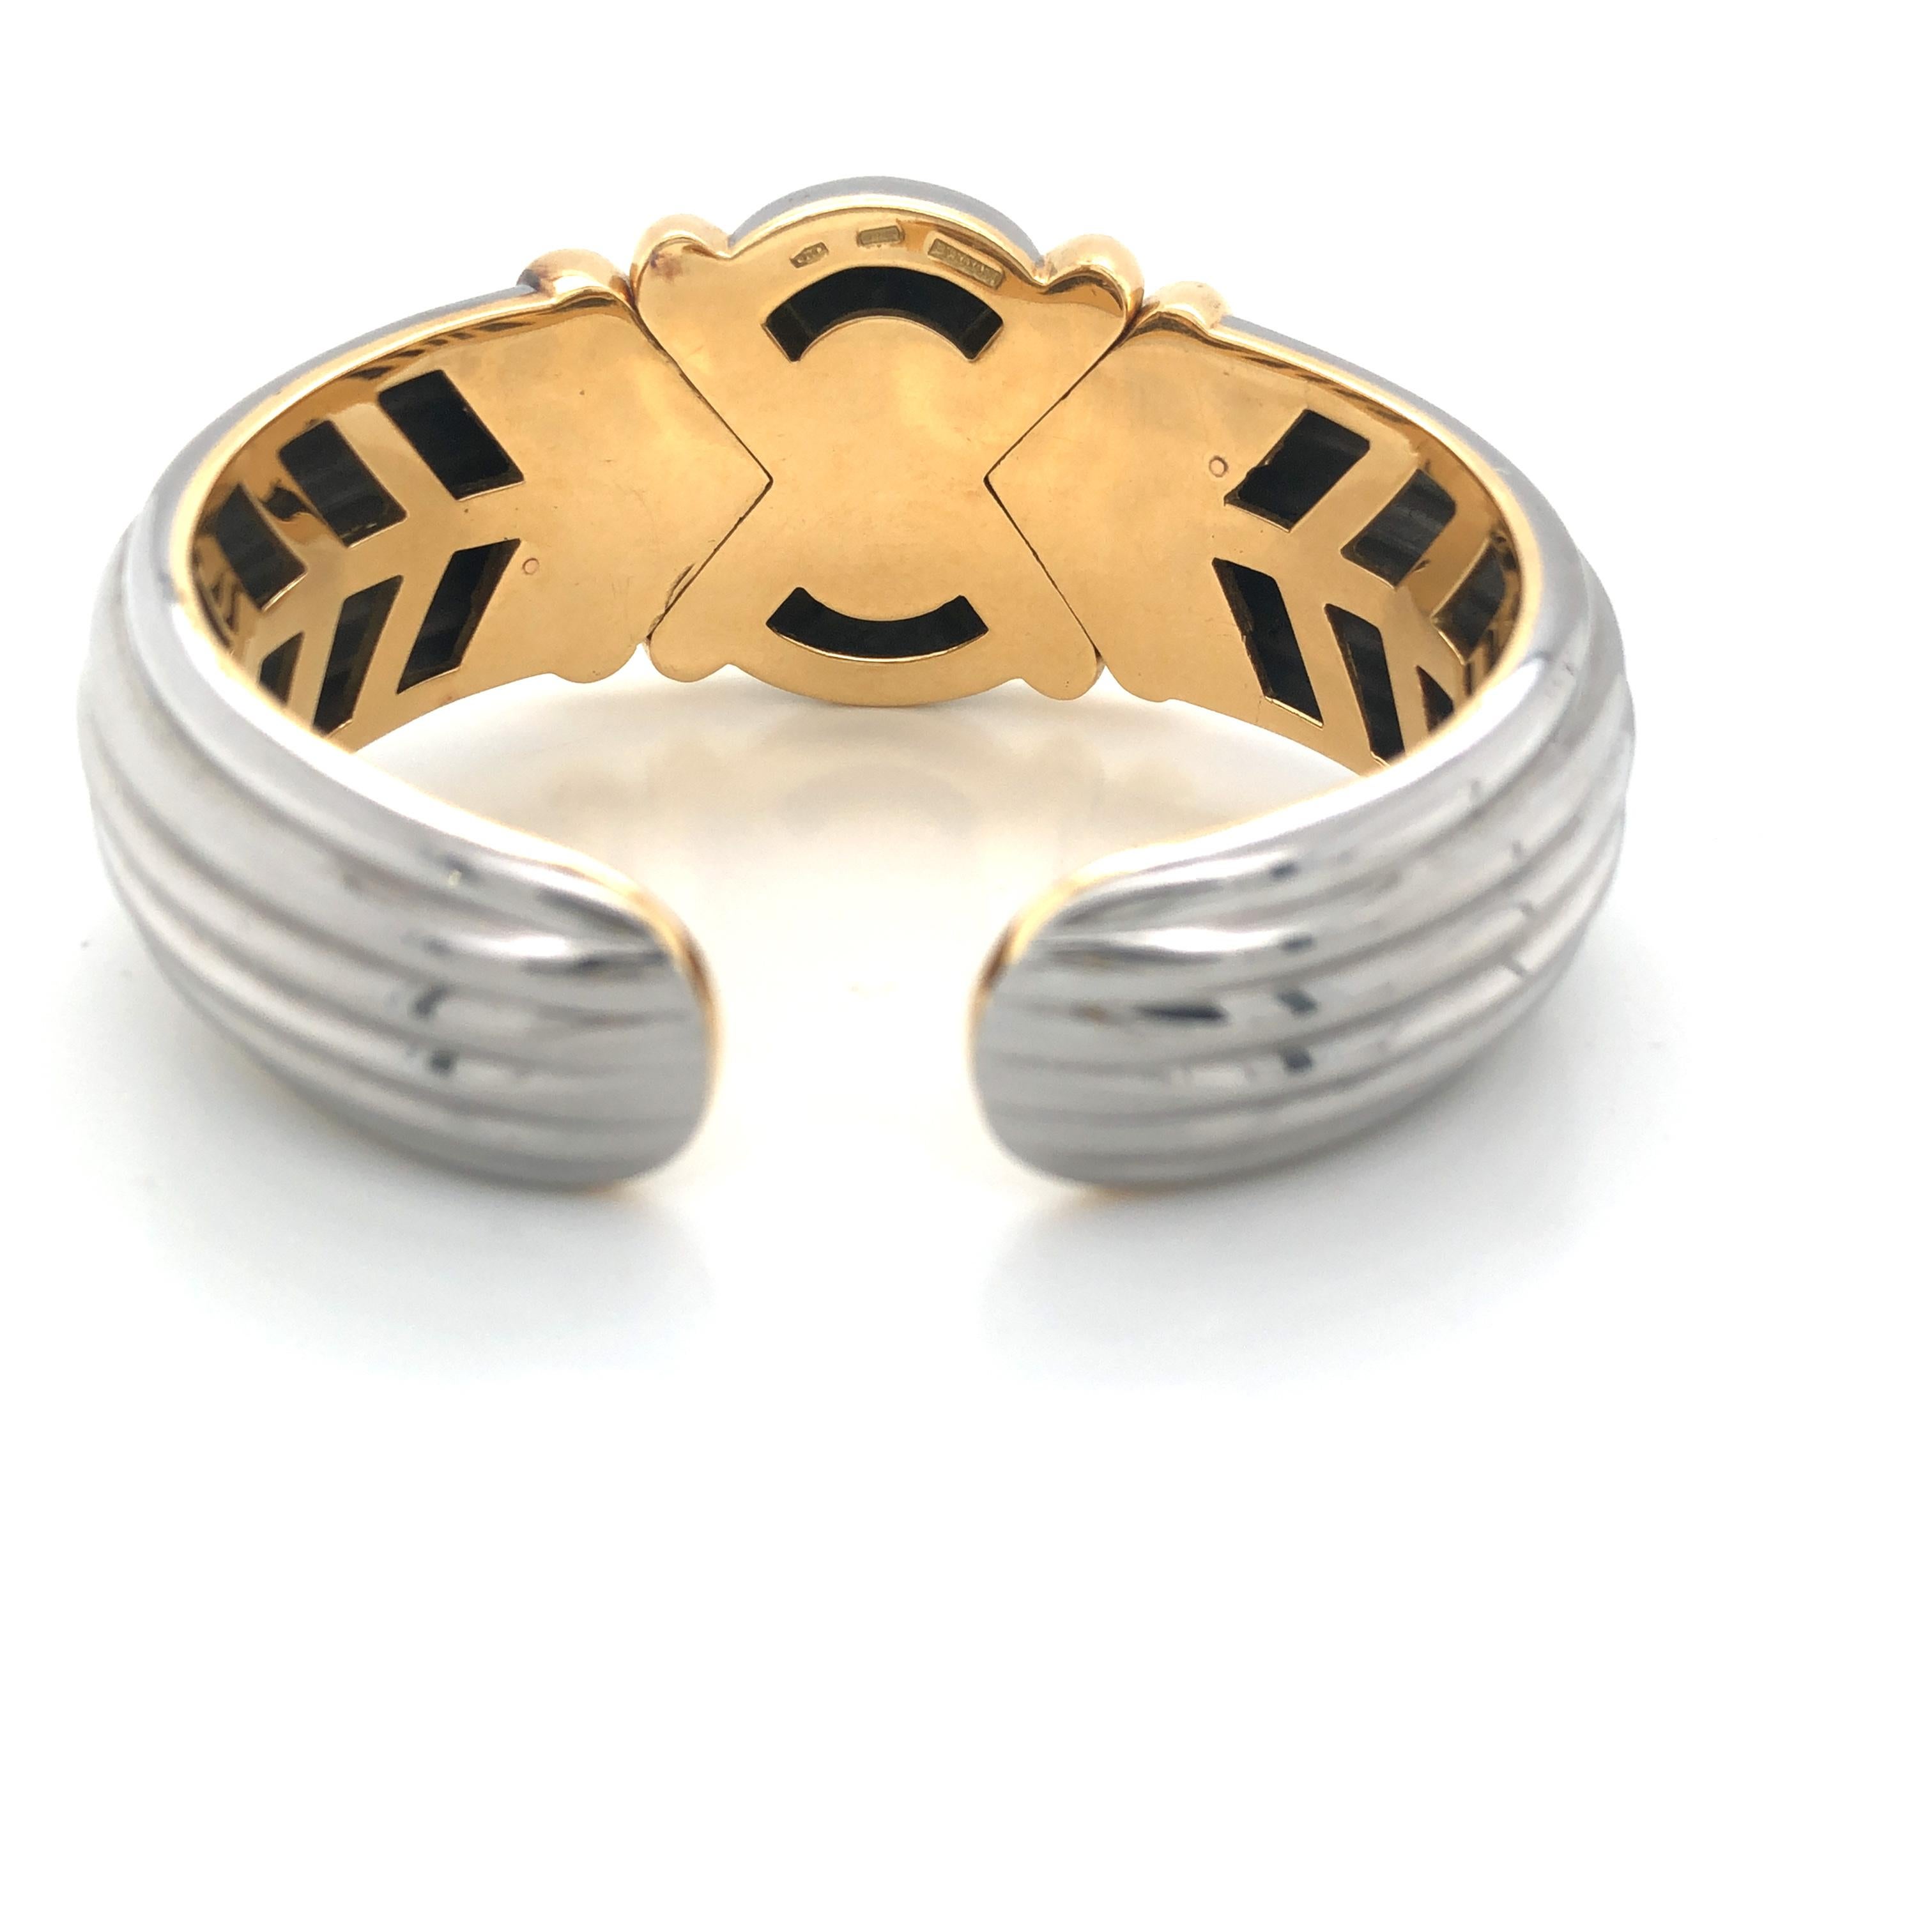 Women's or Men's Bvlgari Stainless Steel and Gold Cuff Bracelet